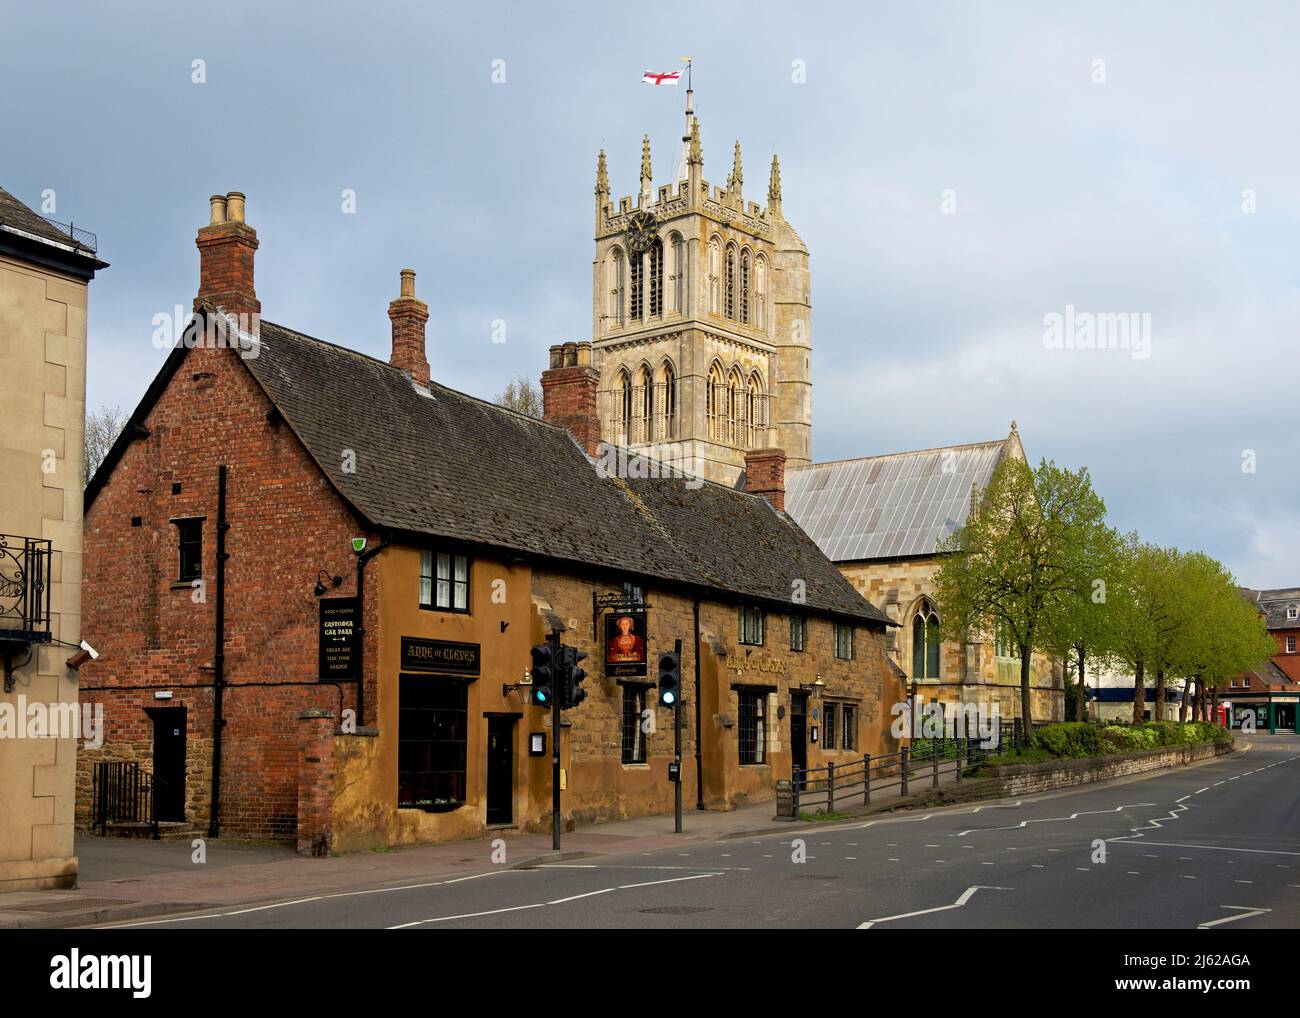 The Anne of Cleves, das älteste Pub in Melton Mowbray, Leicestershire, England Stockfoto